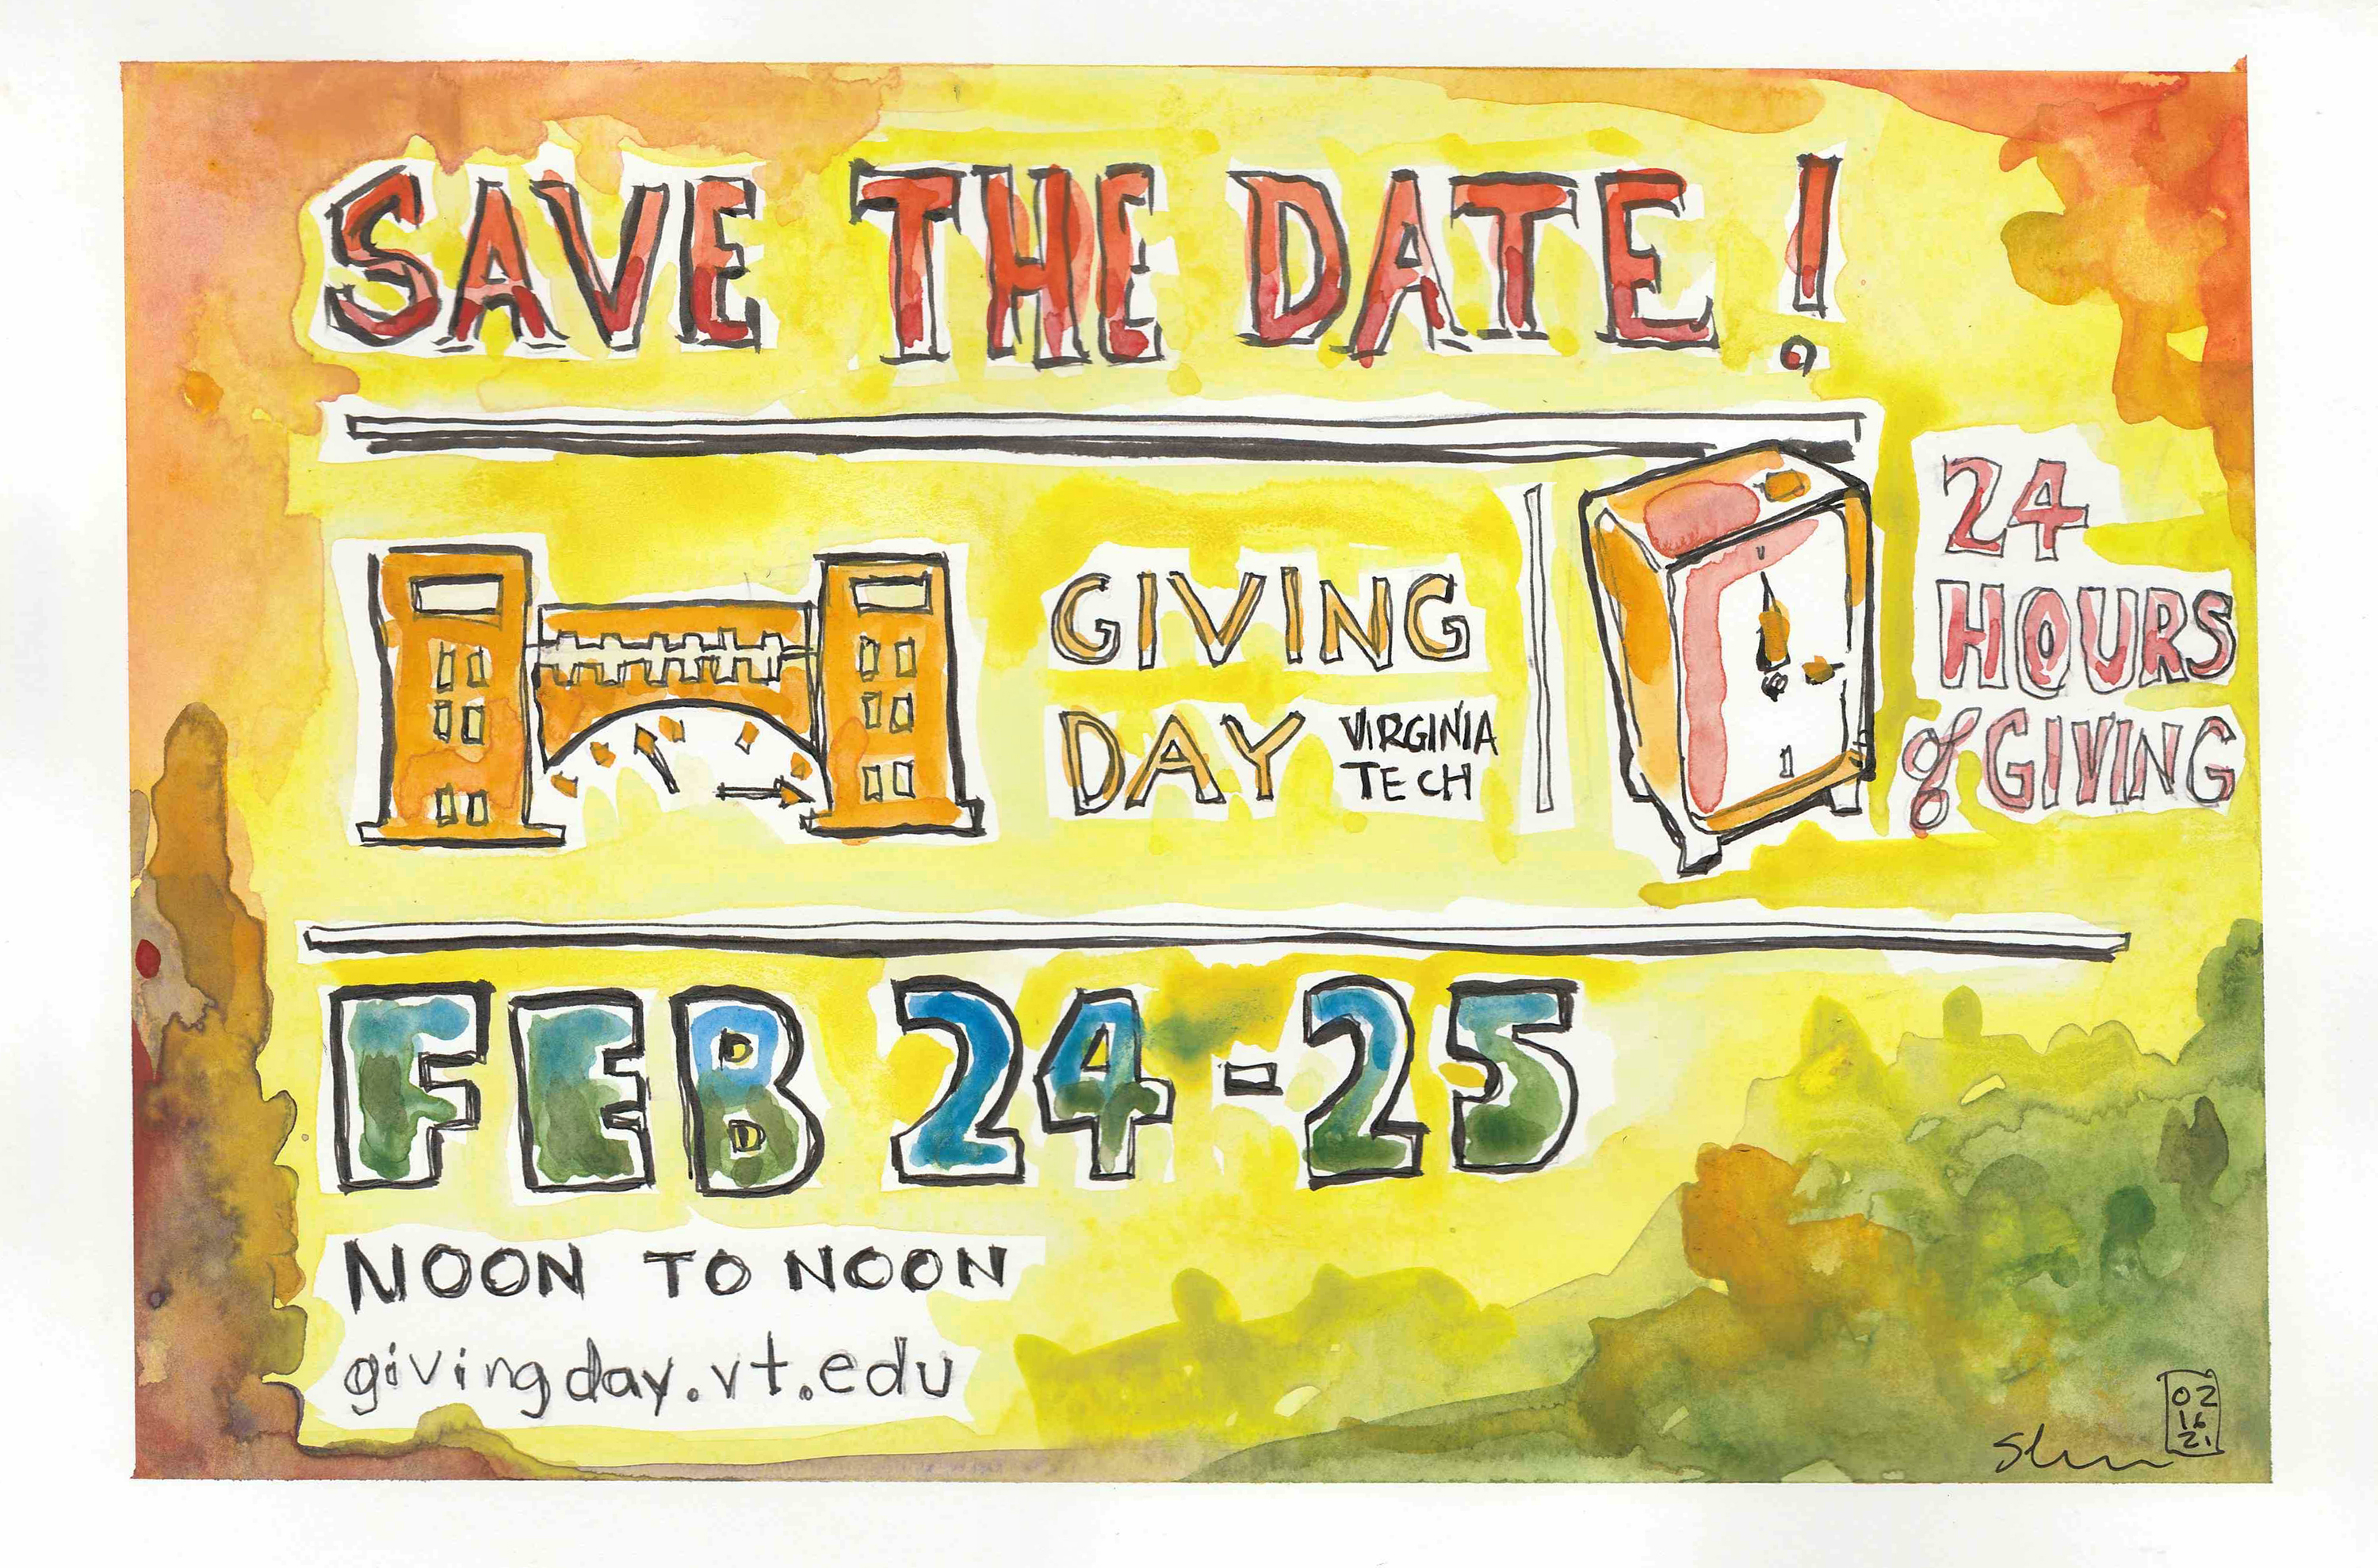 Giving Day is a week away! (00119) -- Appeared on Feb. 17, 2021